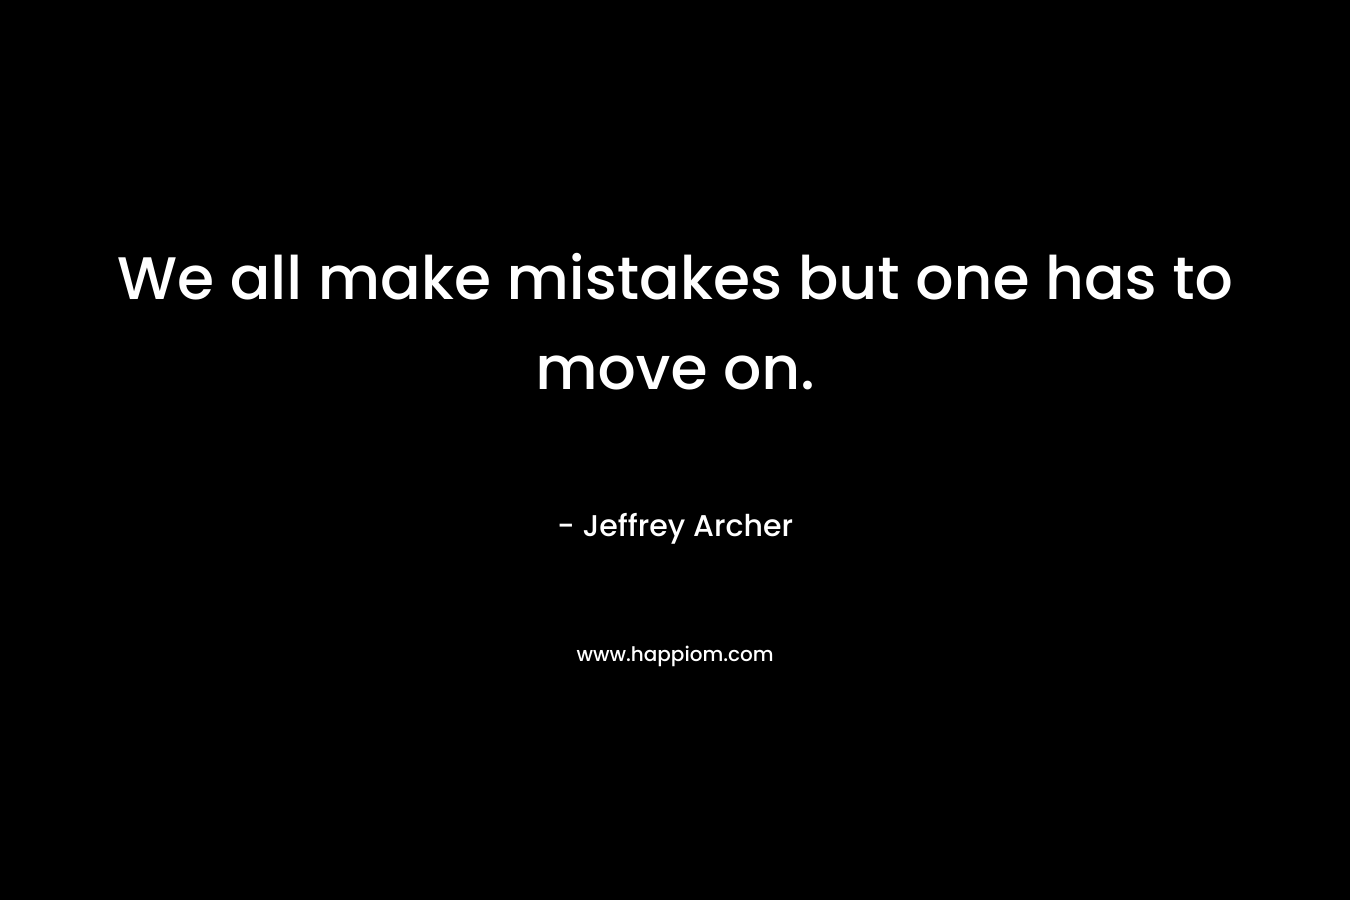 We all make mistakes but one has to move on.